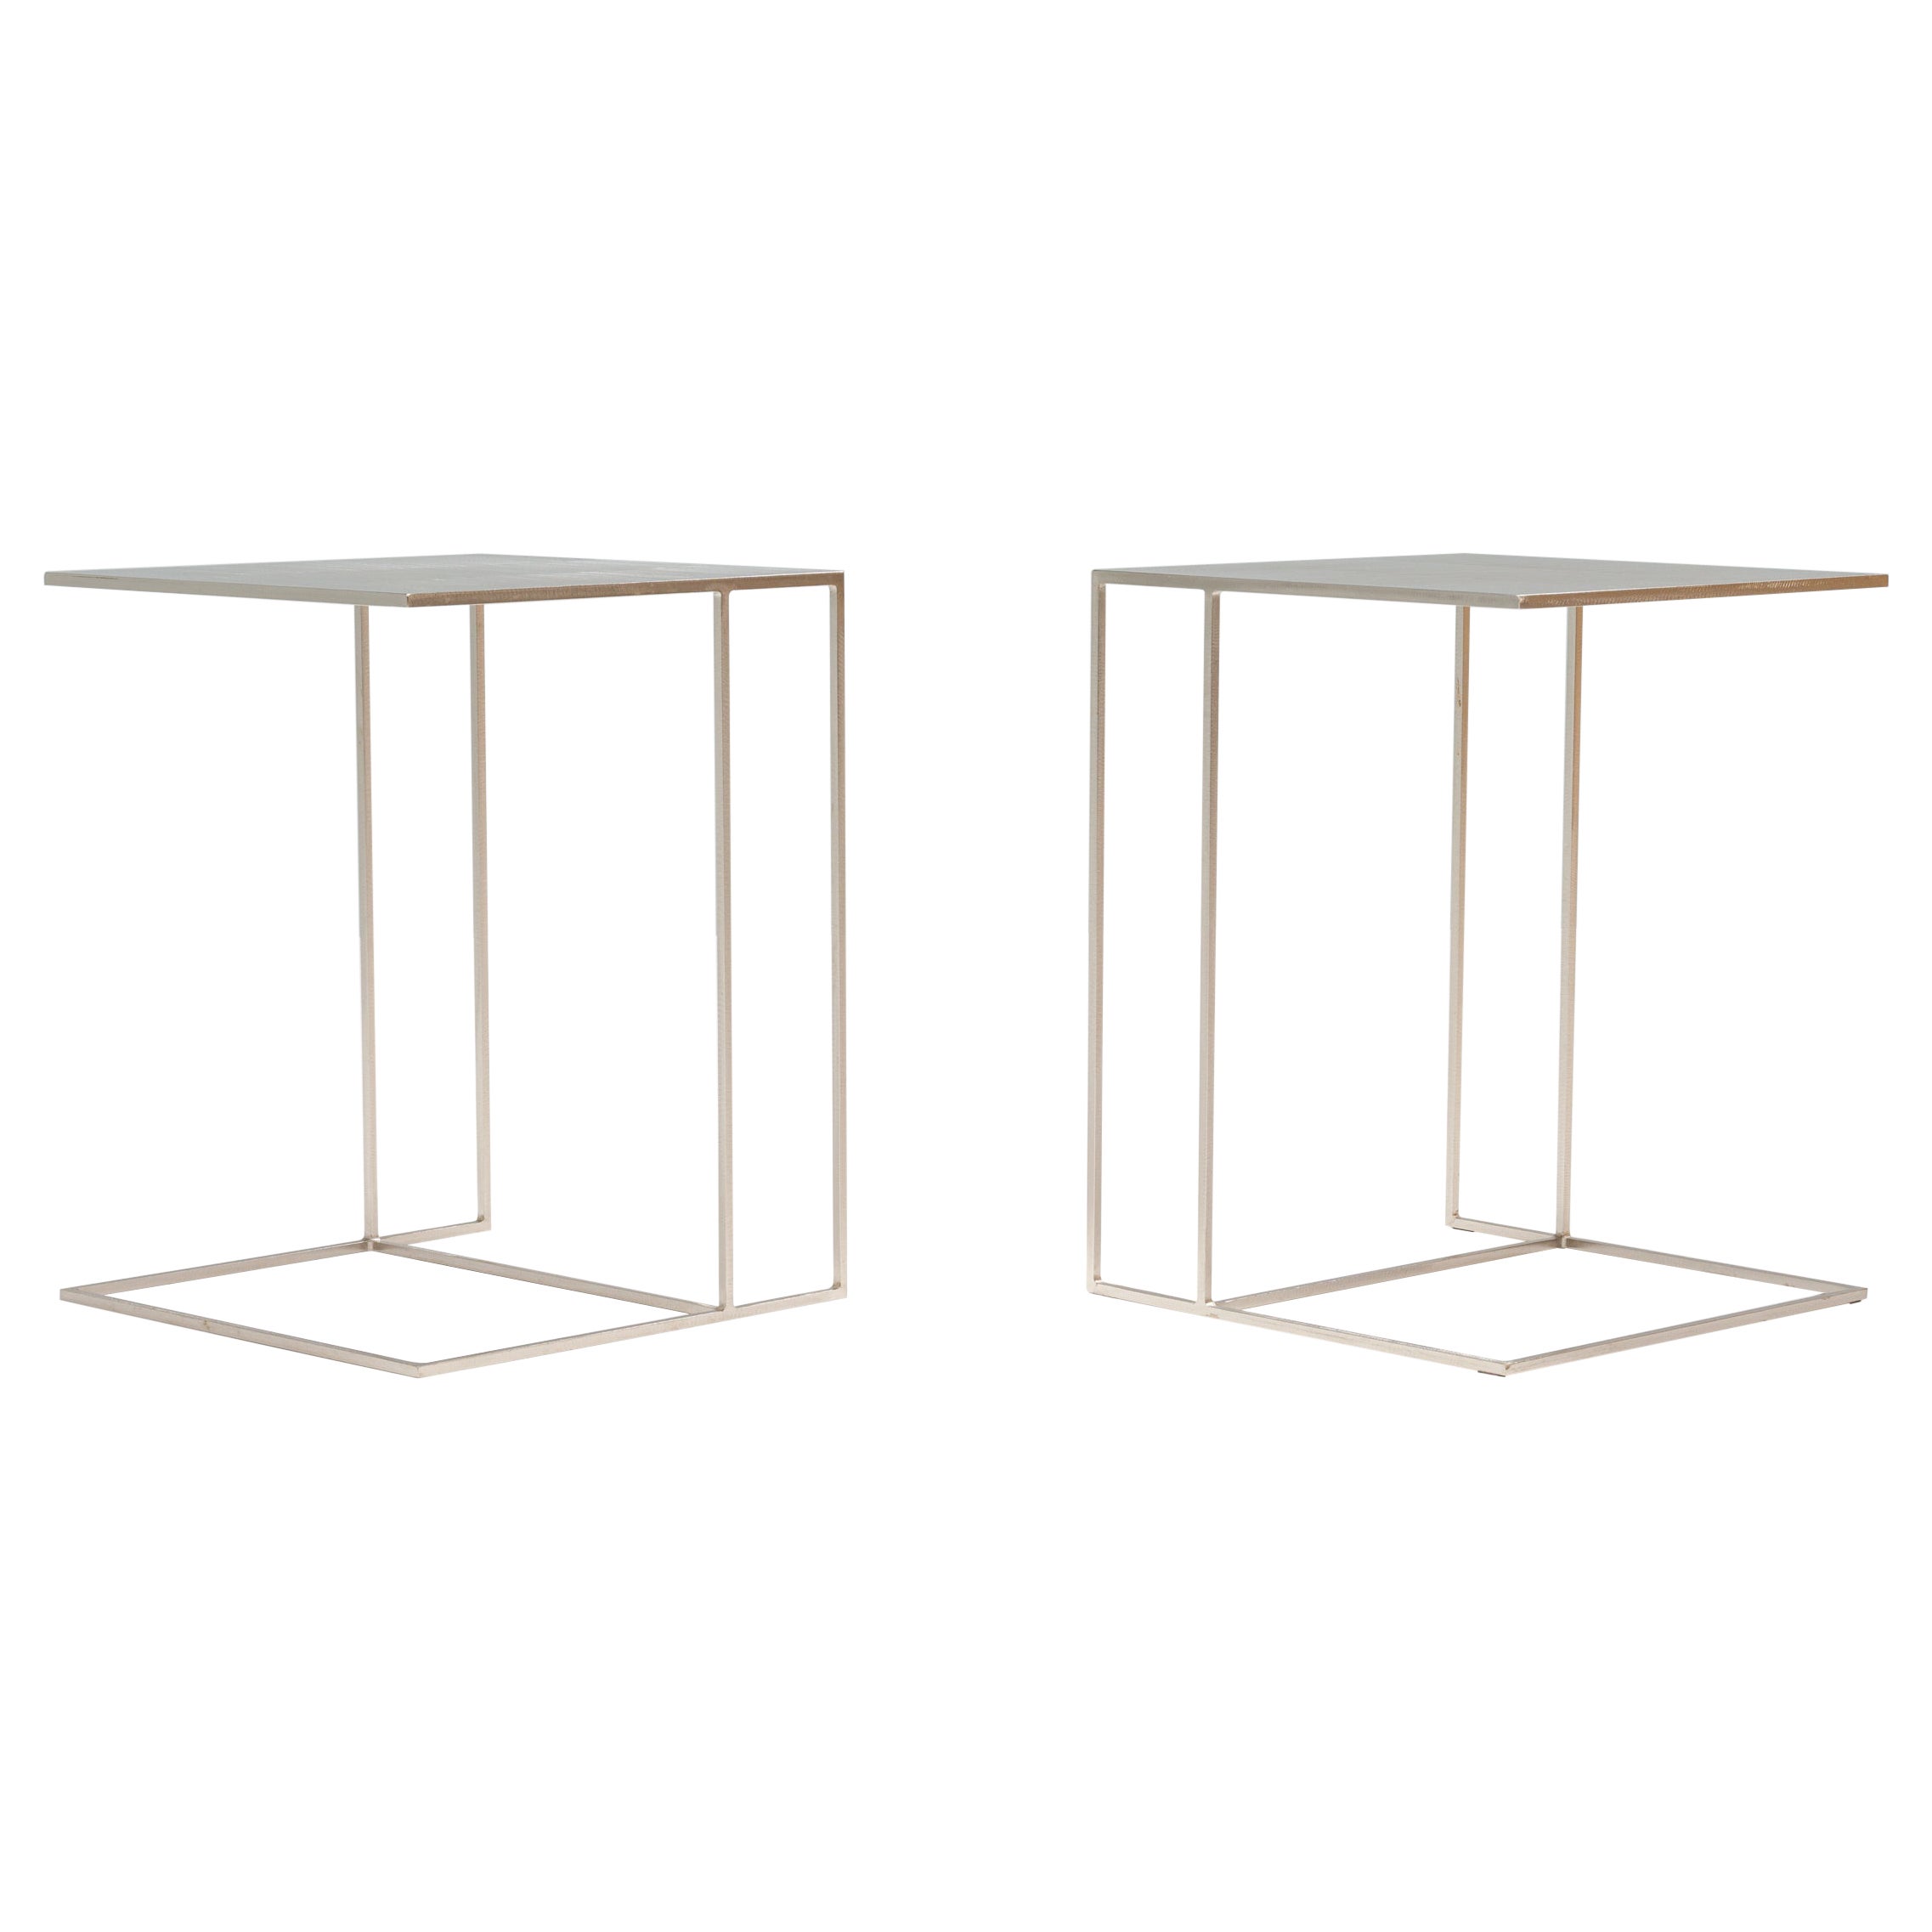 Minotti by Rodolfo Dordoni Leger Brushed Steel Side Tables, Set of Two